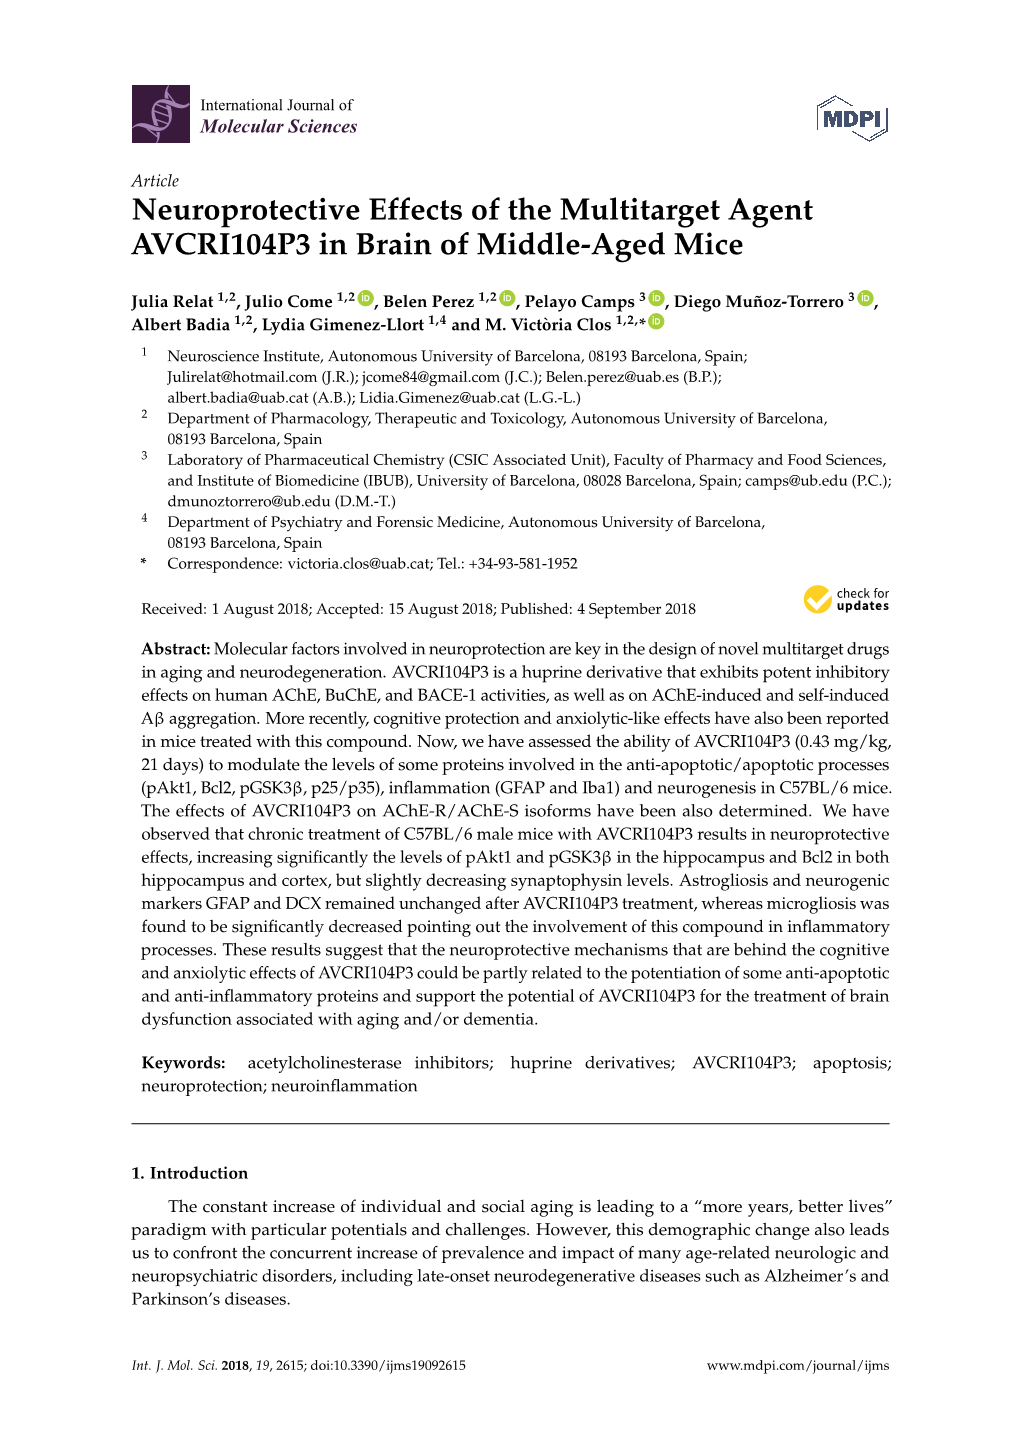 Neuroprotective Effects of the Multitarget Agent AVCRI104P3 in Brain of Middle-Aged Mice